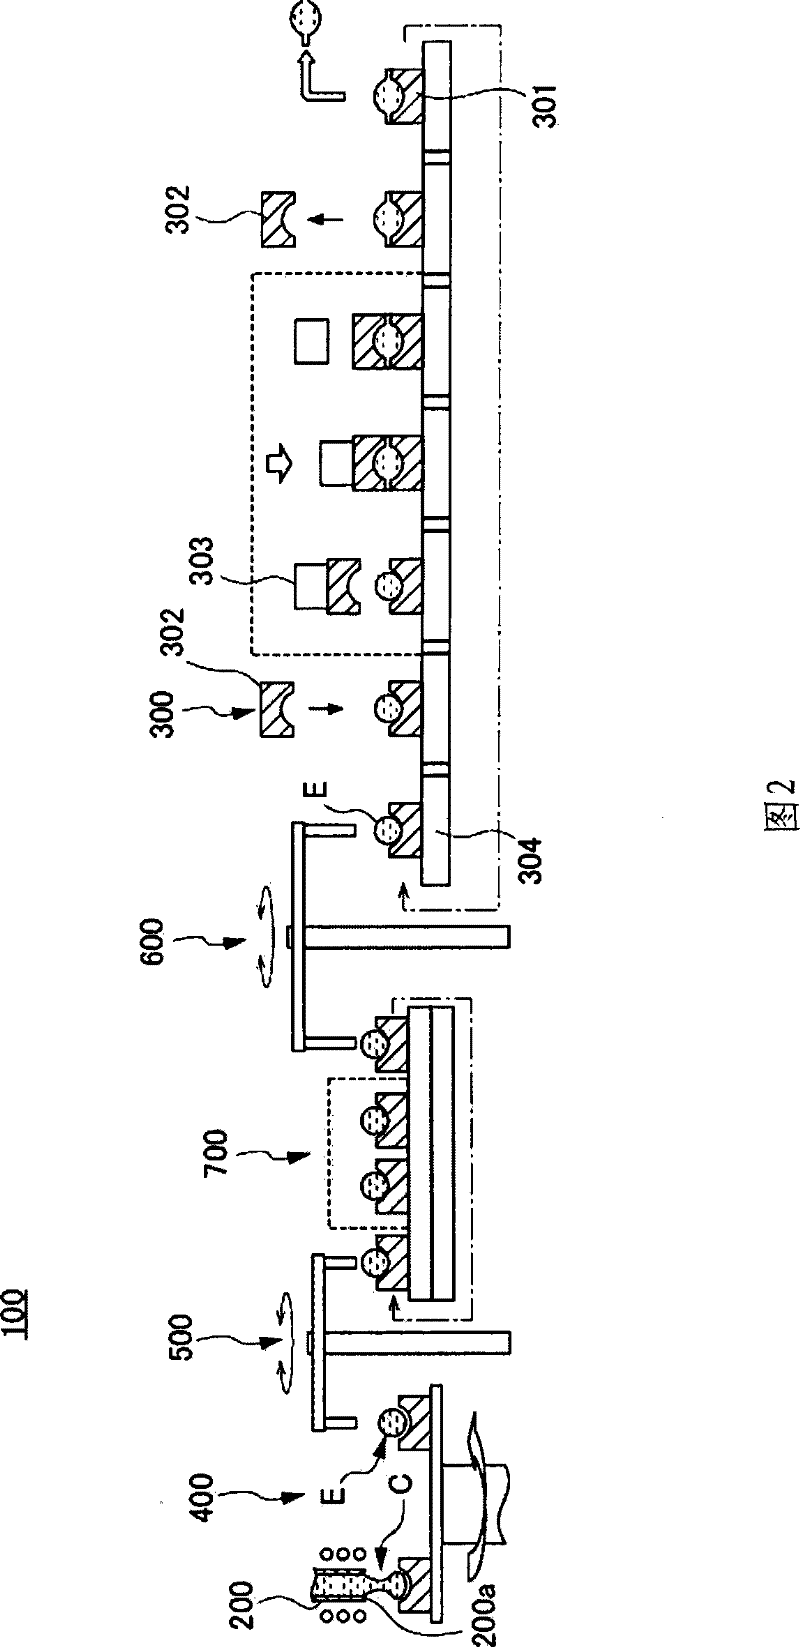 Device and method for manufacturing optical elements